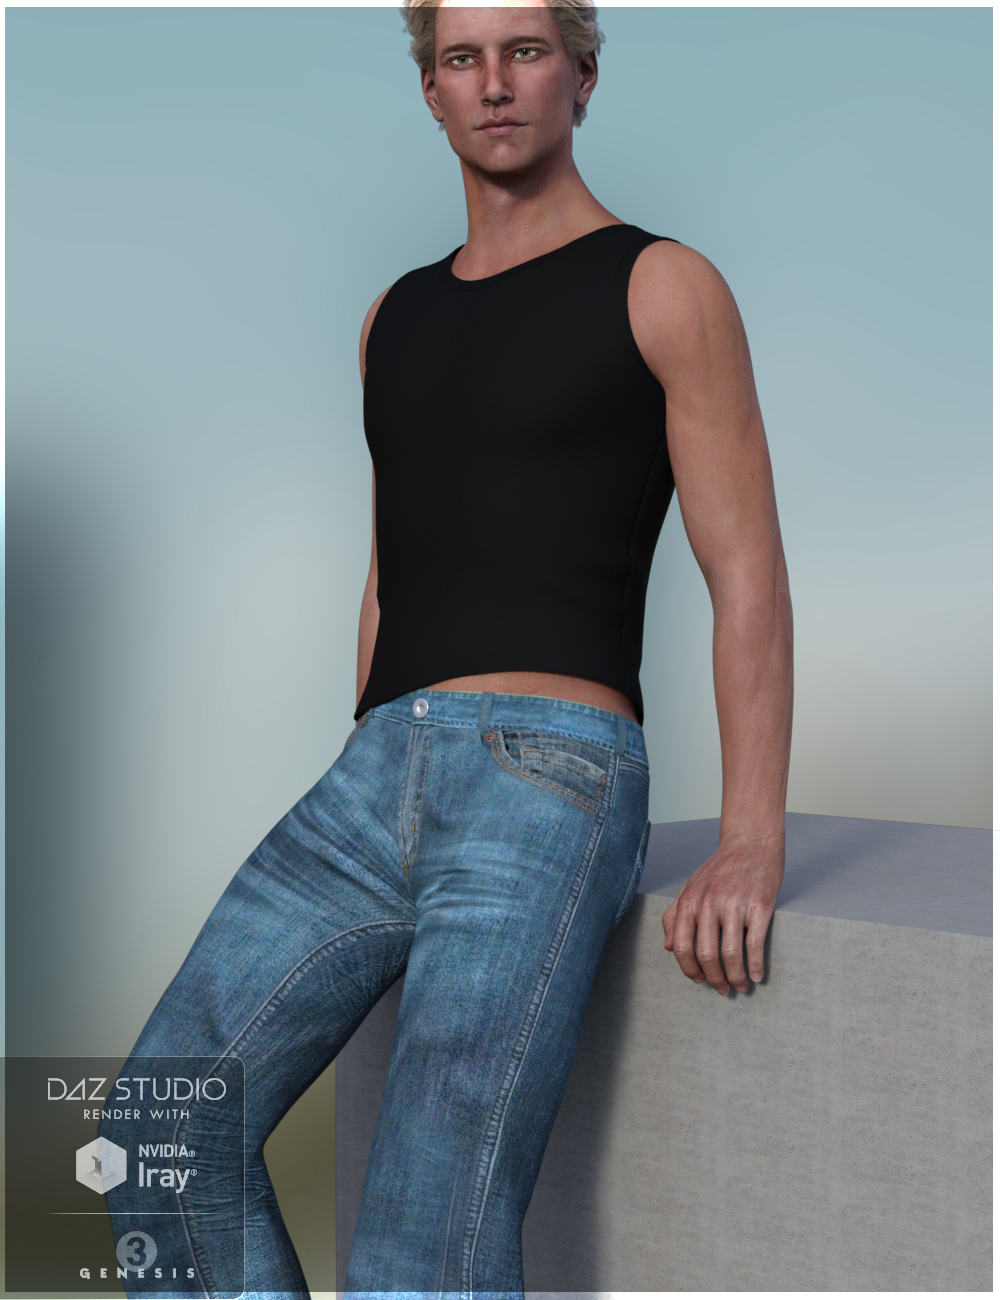 Chilled Out Outfit for Genesis 3 Male(s) by: Nikisatez, 3D Models by Daz 3D